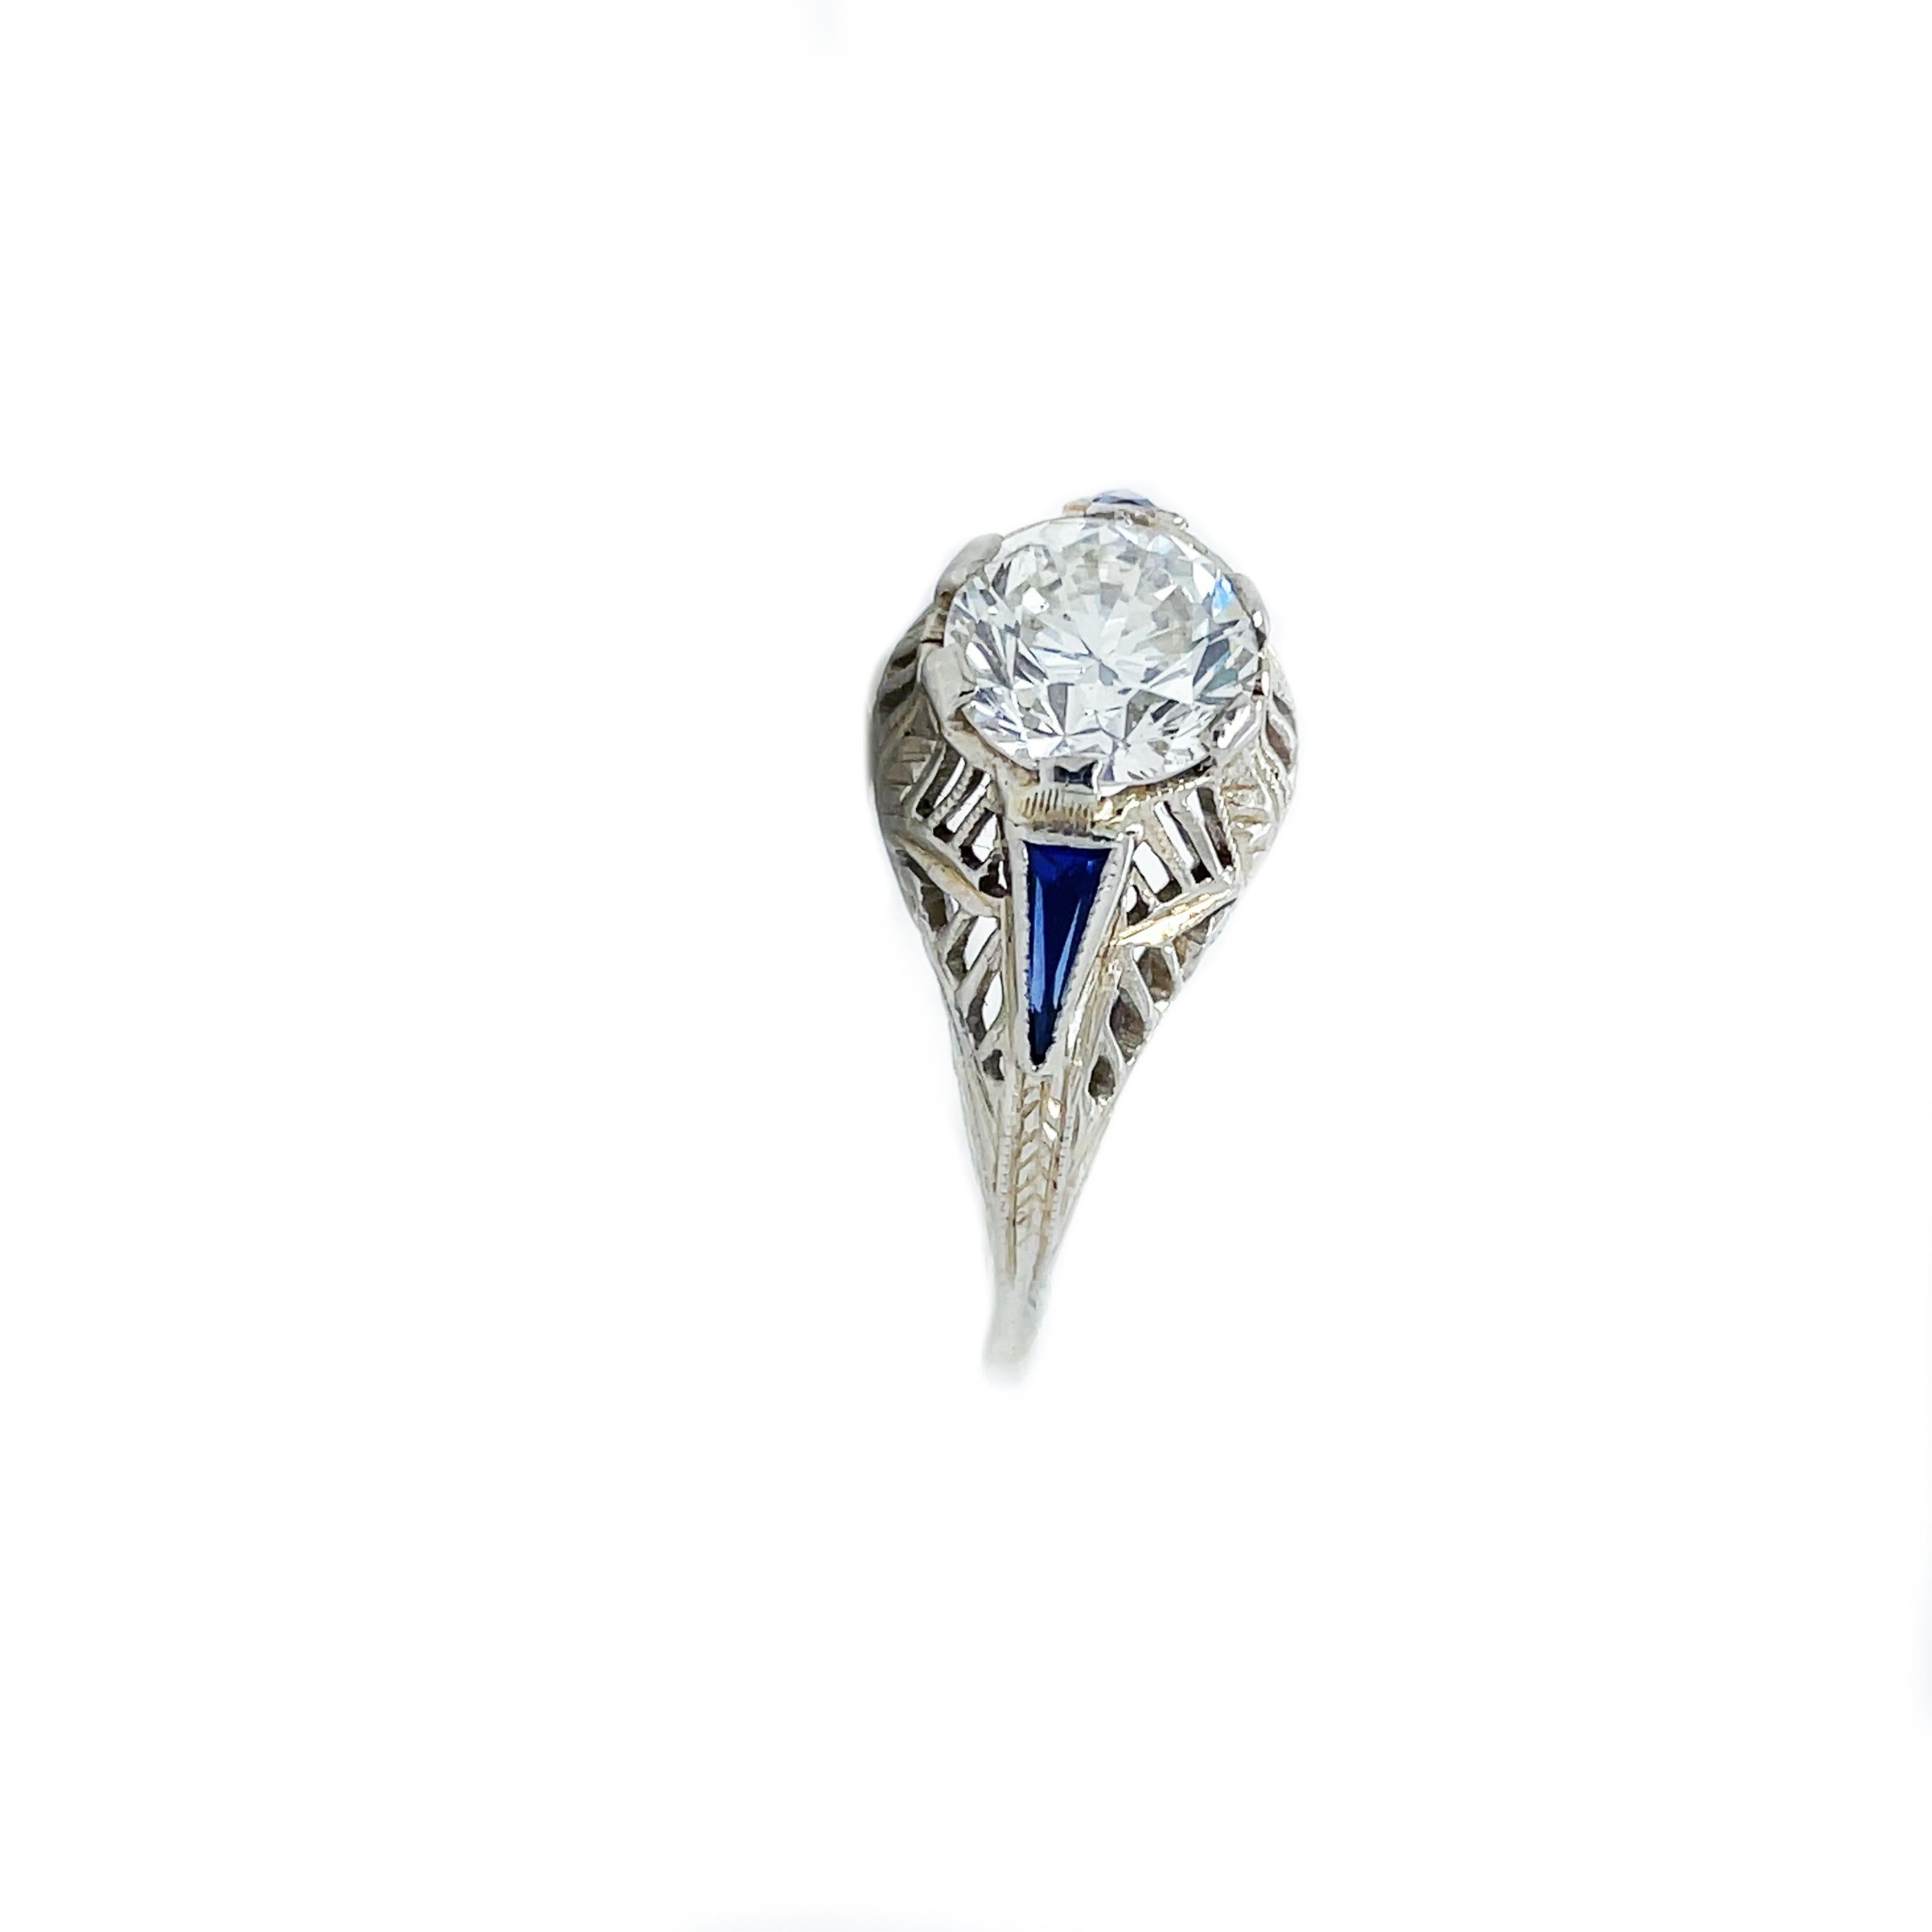 1925 Art Deco Diamond and Sapphire White Gold Ring with AGS Report For Sale 1